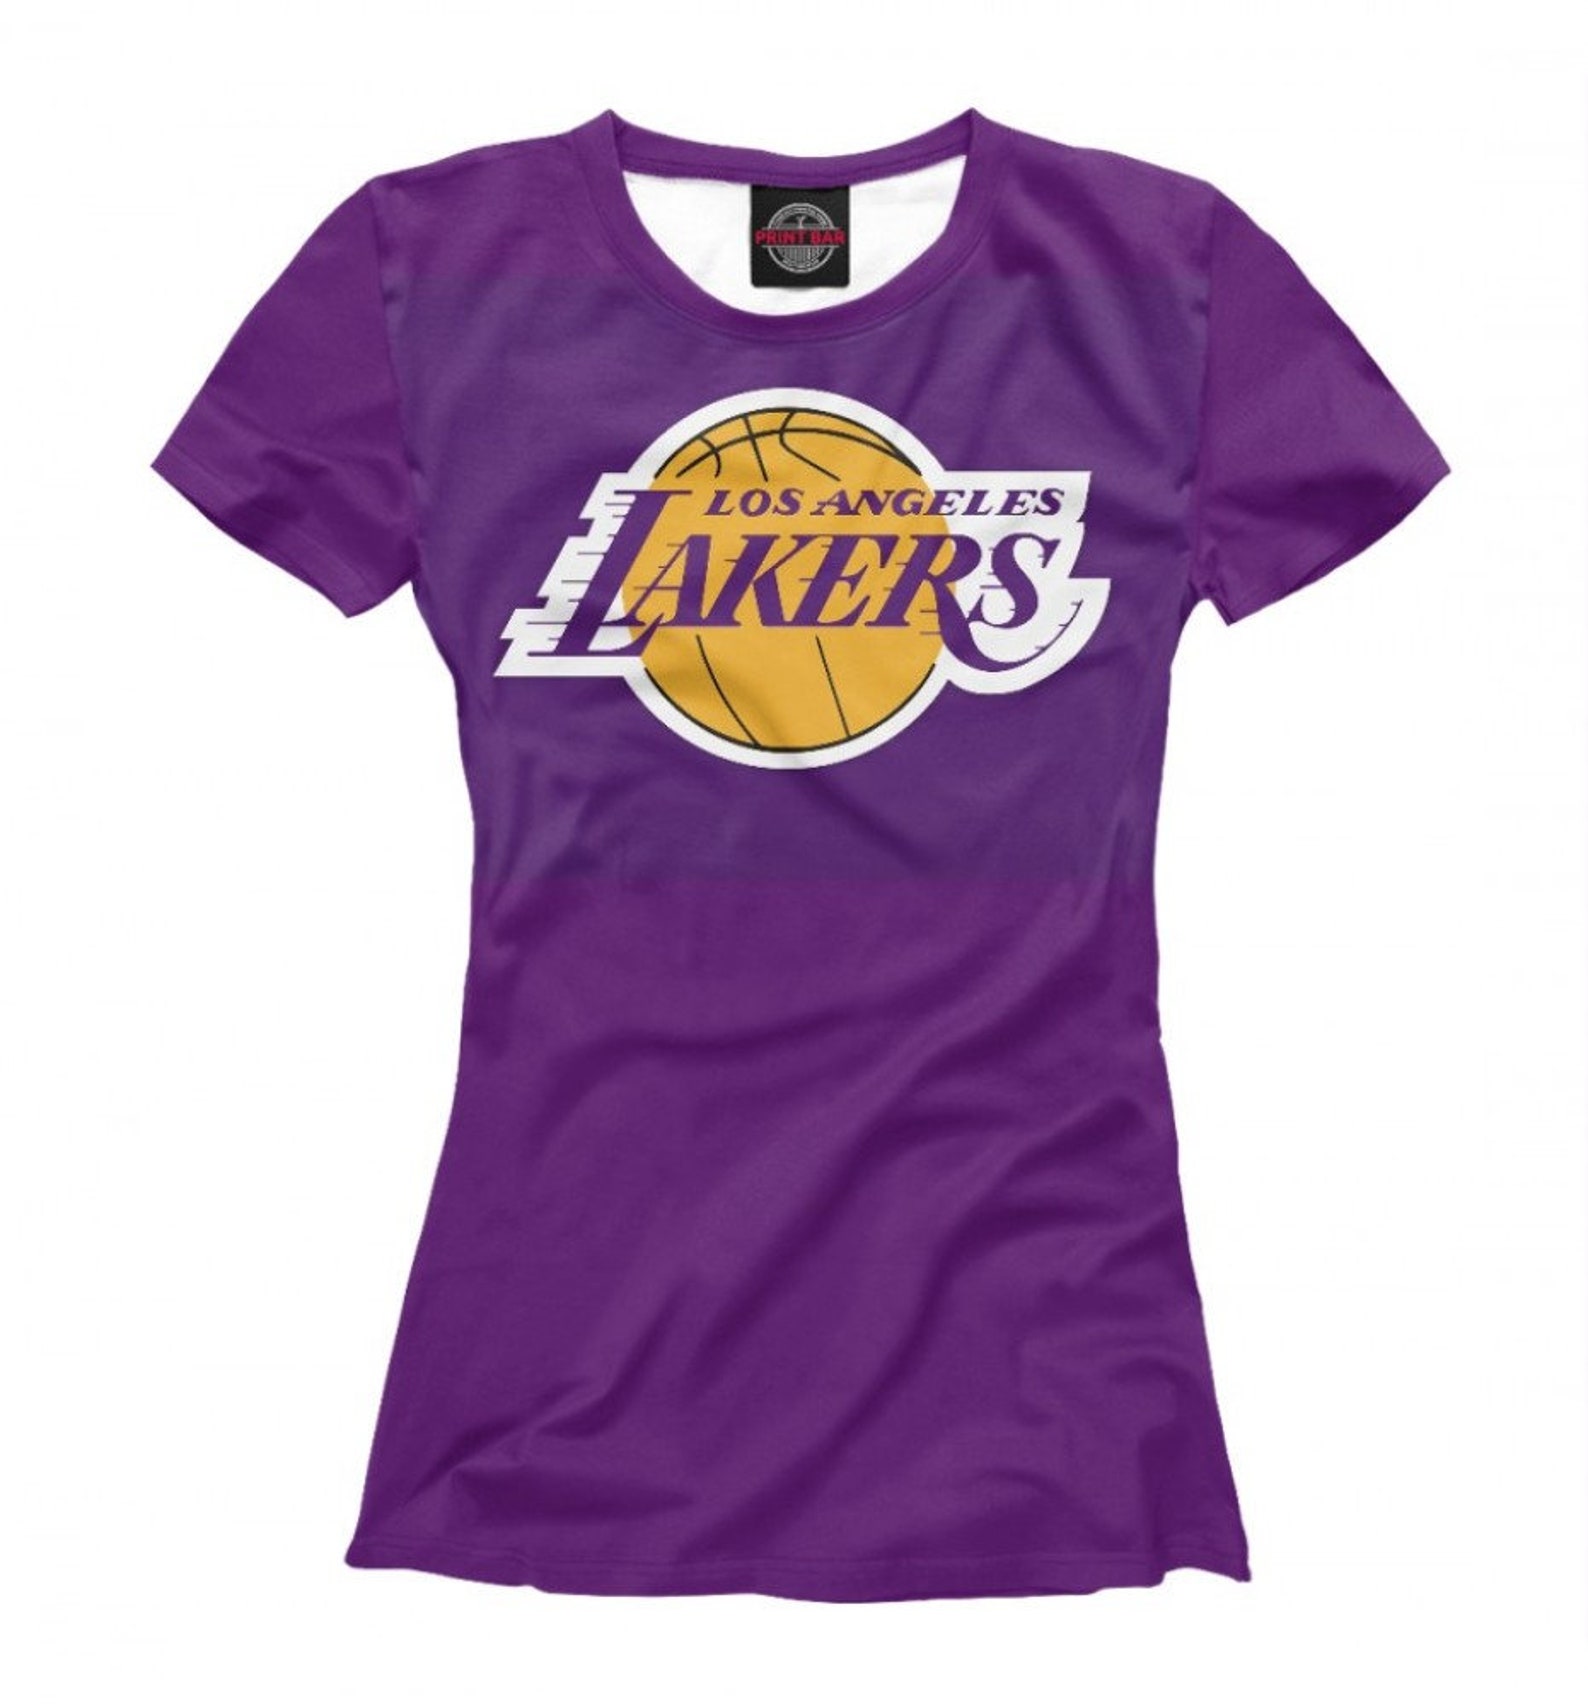 Los Angeles Lakers T-Shirt Men's Women's All Sizes | Etsy